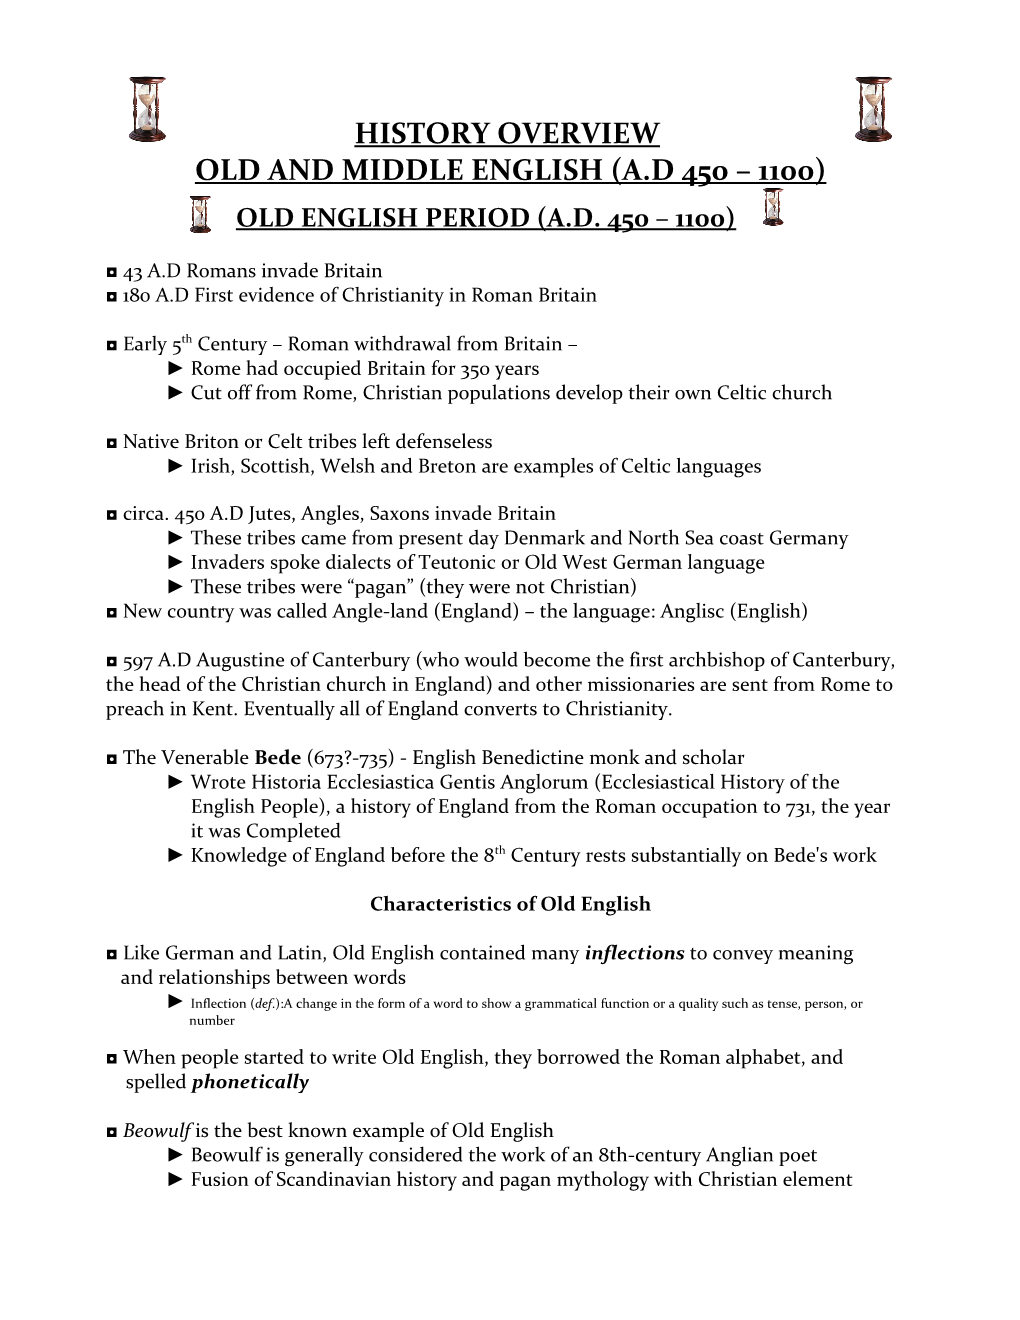 History Overview and Time-Line for Old and Middle English